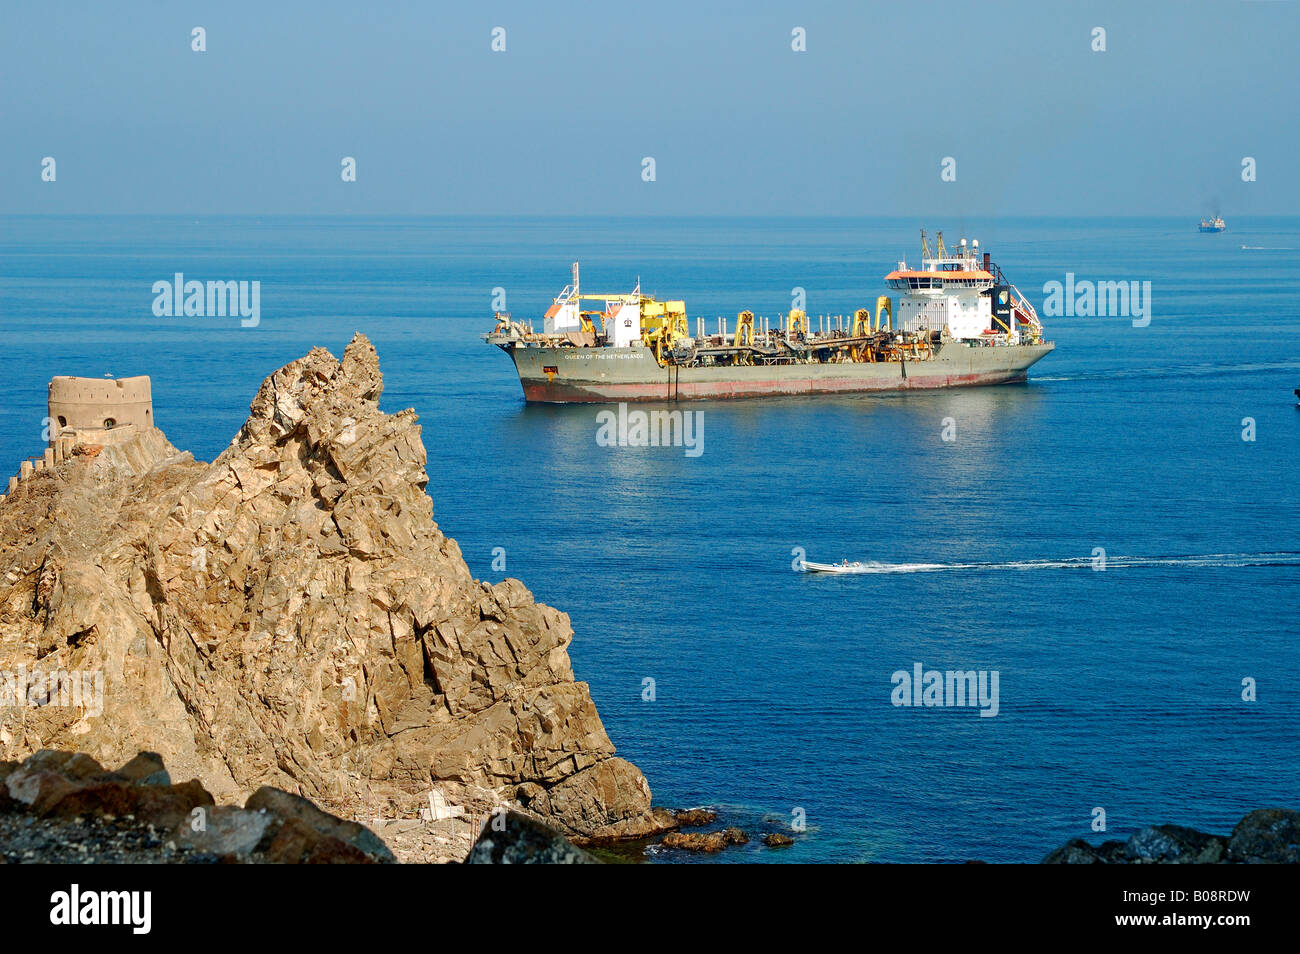 Dredger 'Queen of the Netherlands' entering the harbour of Sultan Qaboos, Muscat, Oman, Middle East Stock Photo